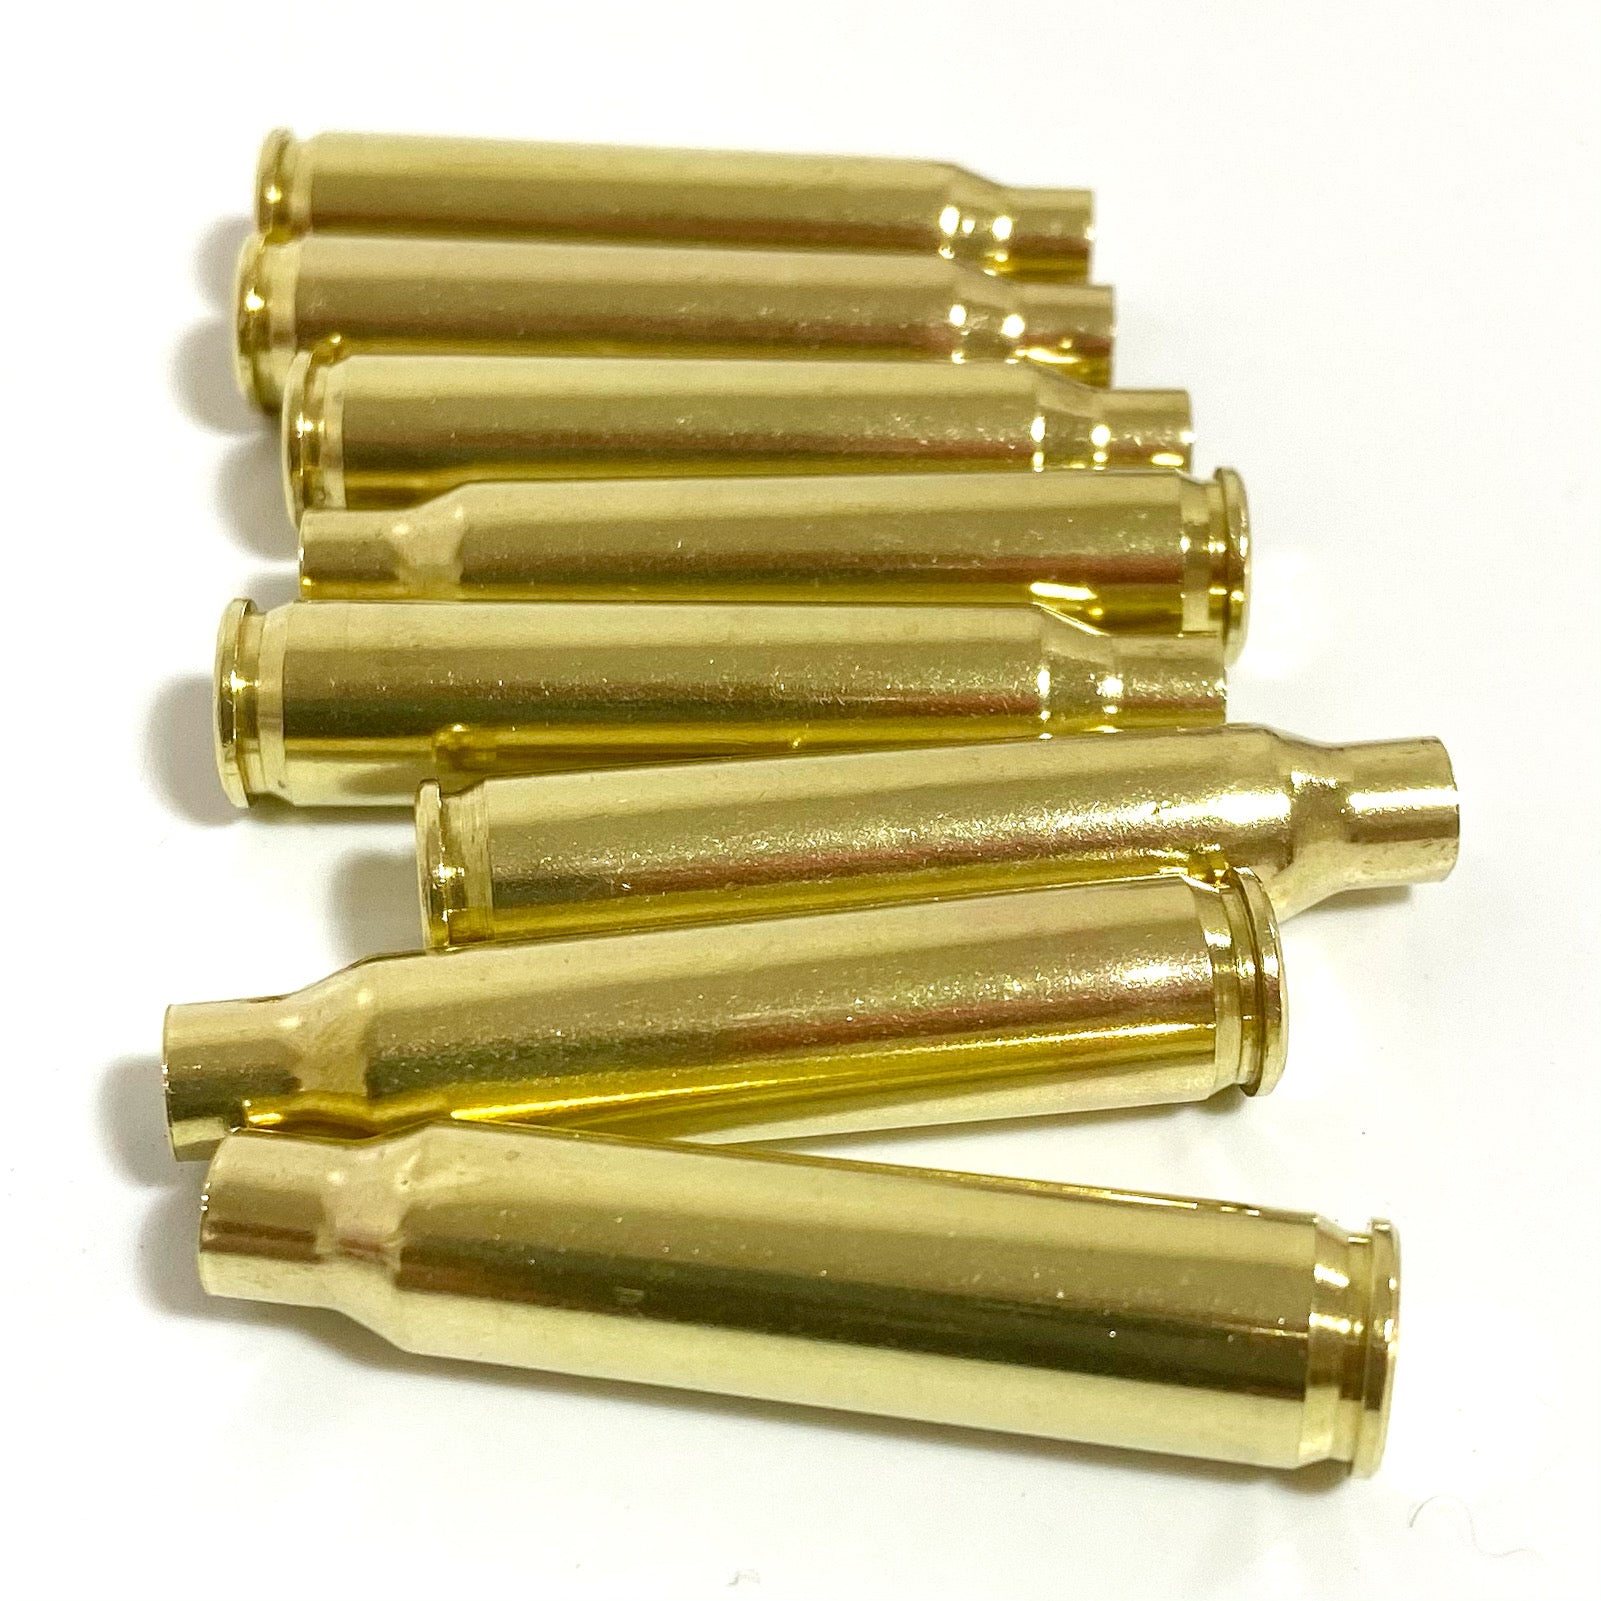 Recycle Your Brass Shell Casings with WV Cashin - West Virginia